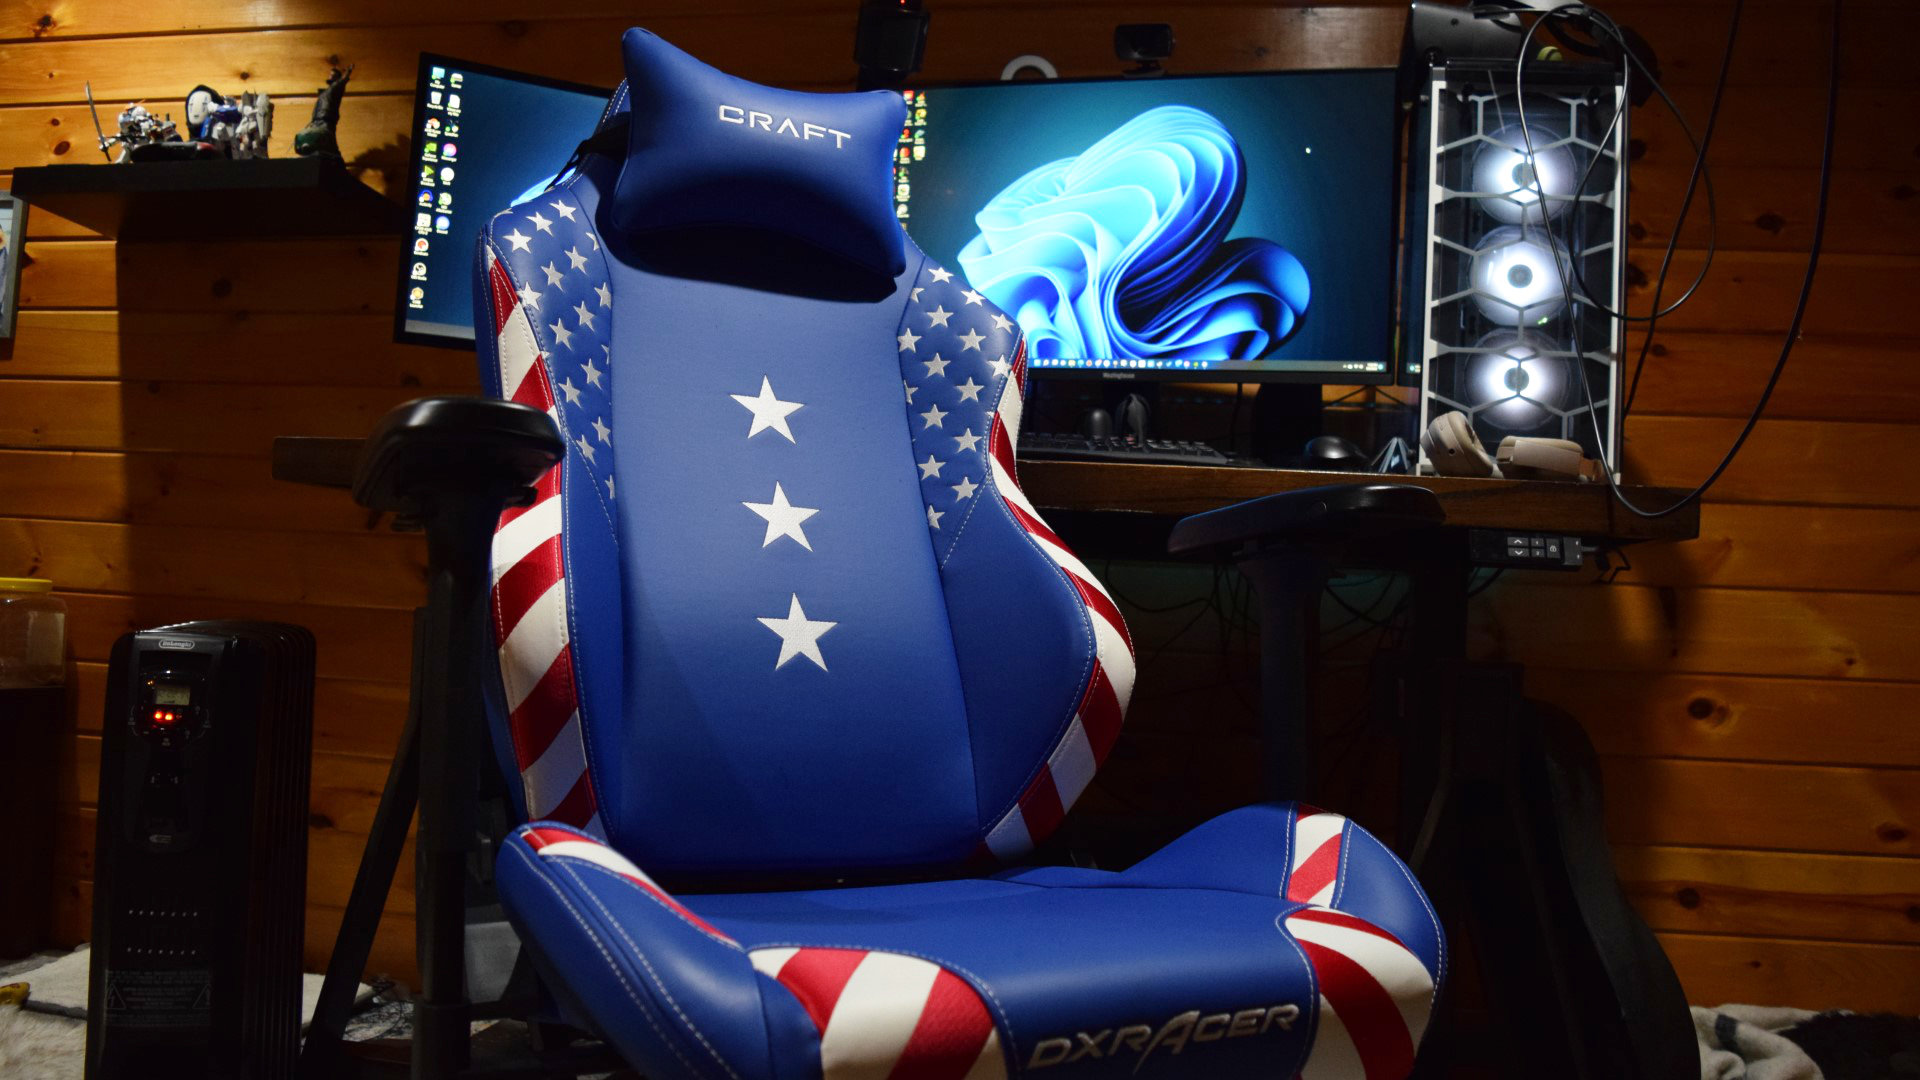 DXRacer Craft gaming chair review – devil's in the details